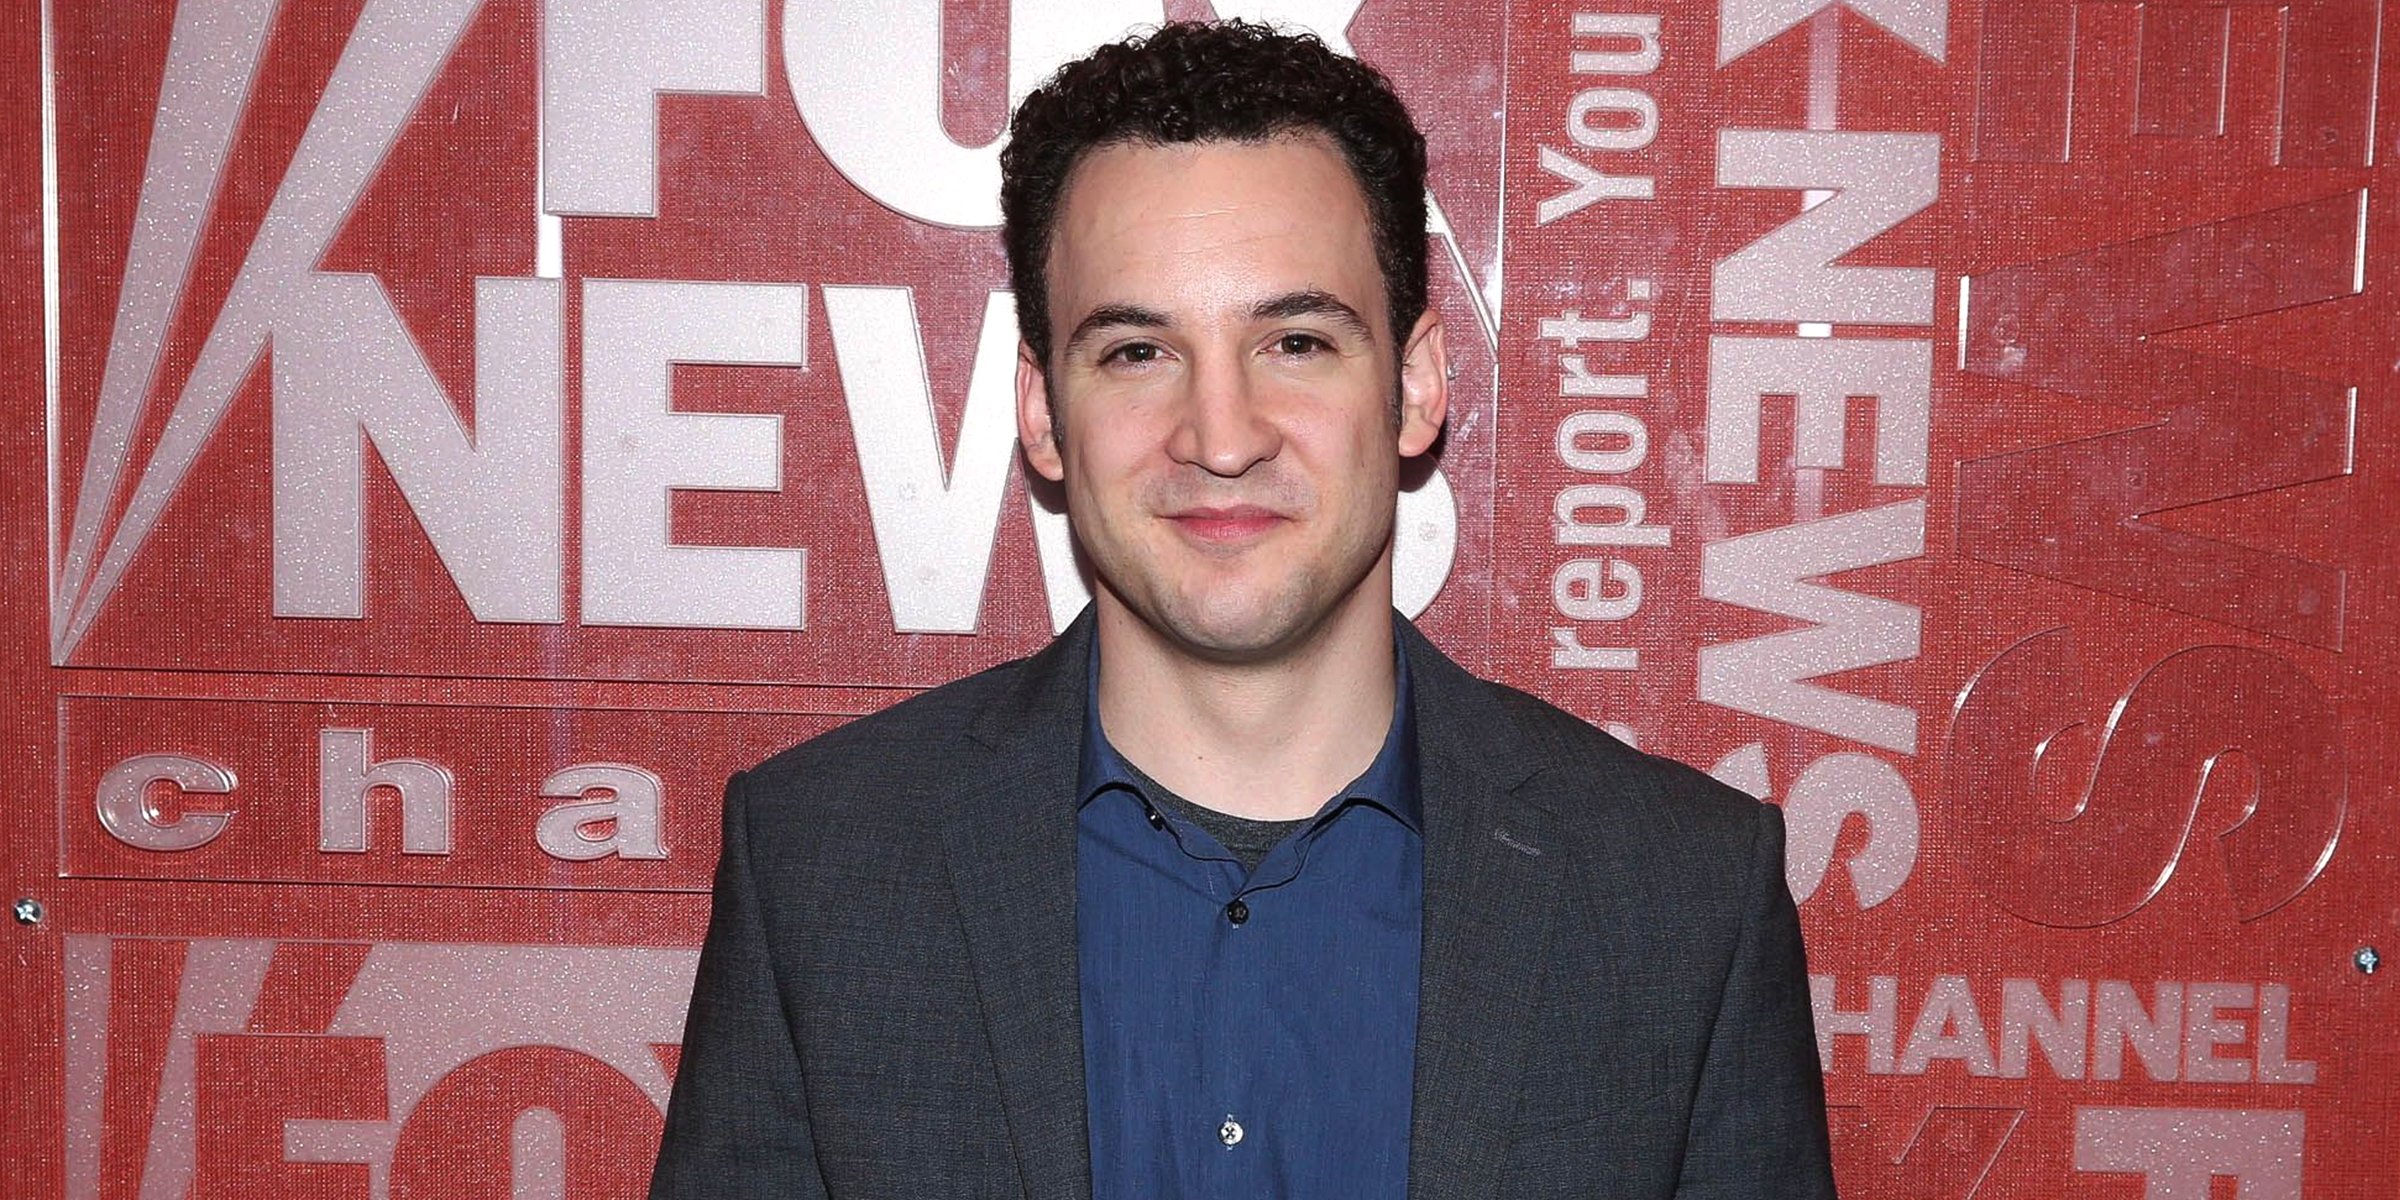 Ben Savage, 2015 | Source: Getty Images